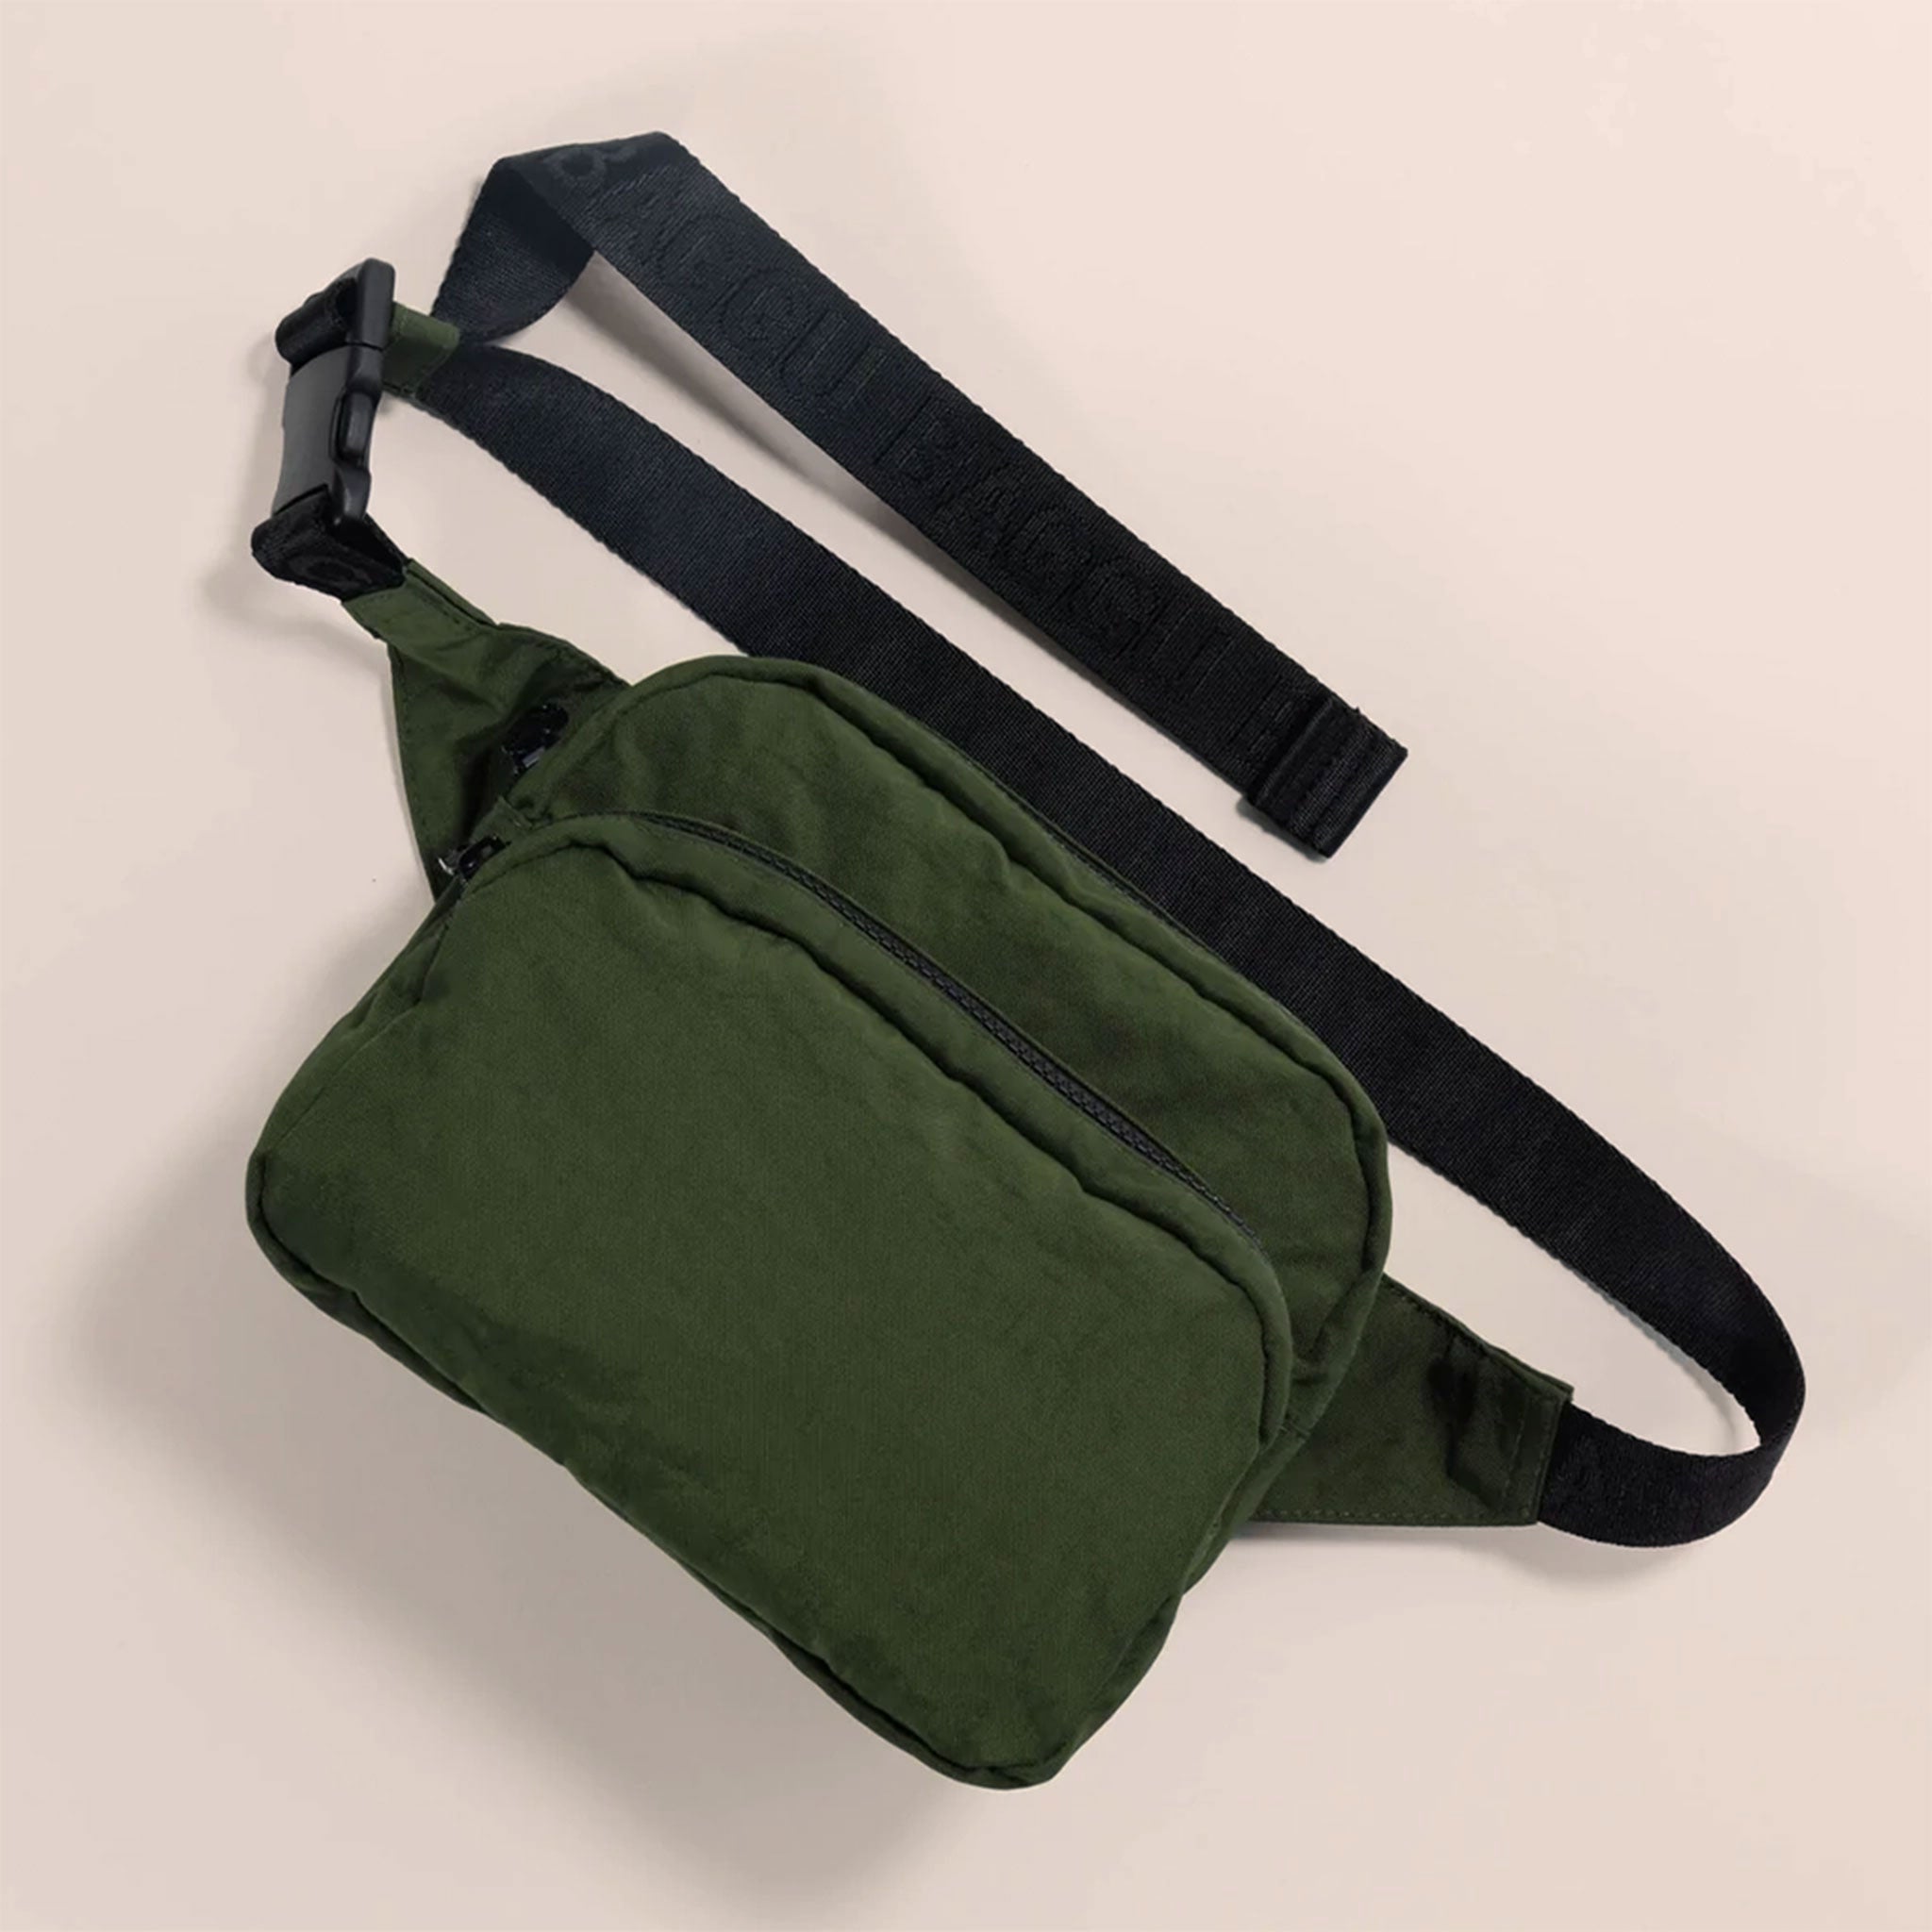 A dark green nylon fanny pack with two zipper pockets and a black adjustable strap.